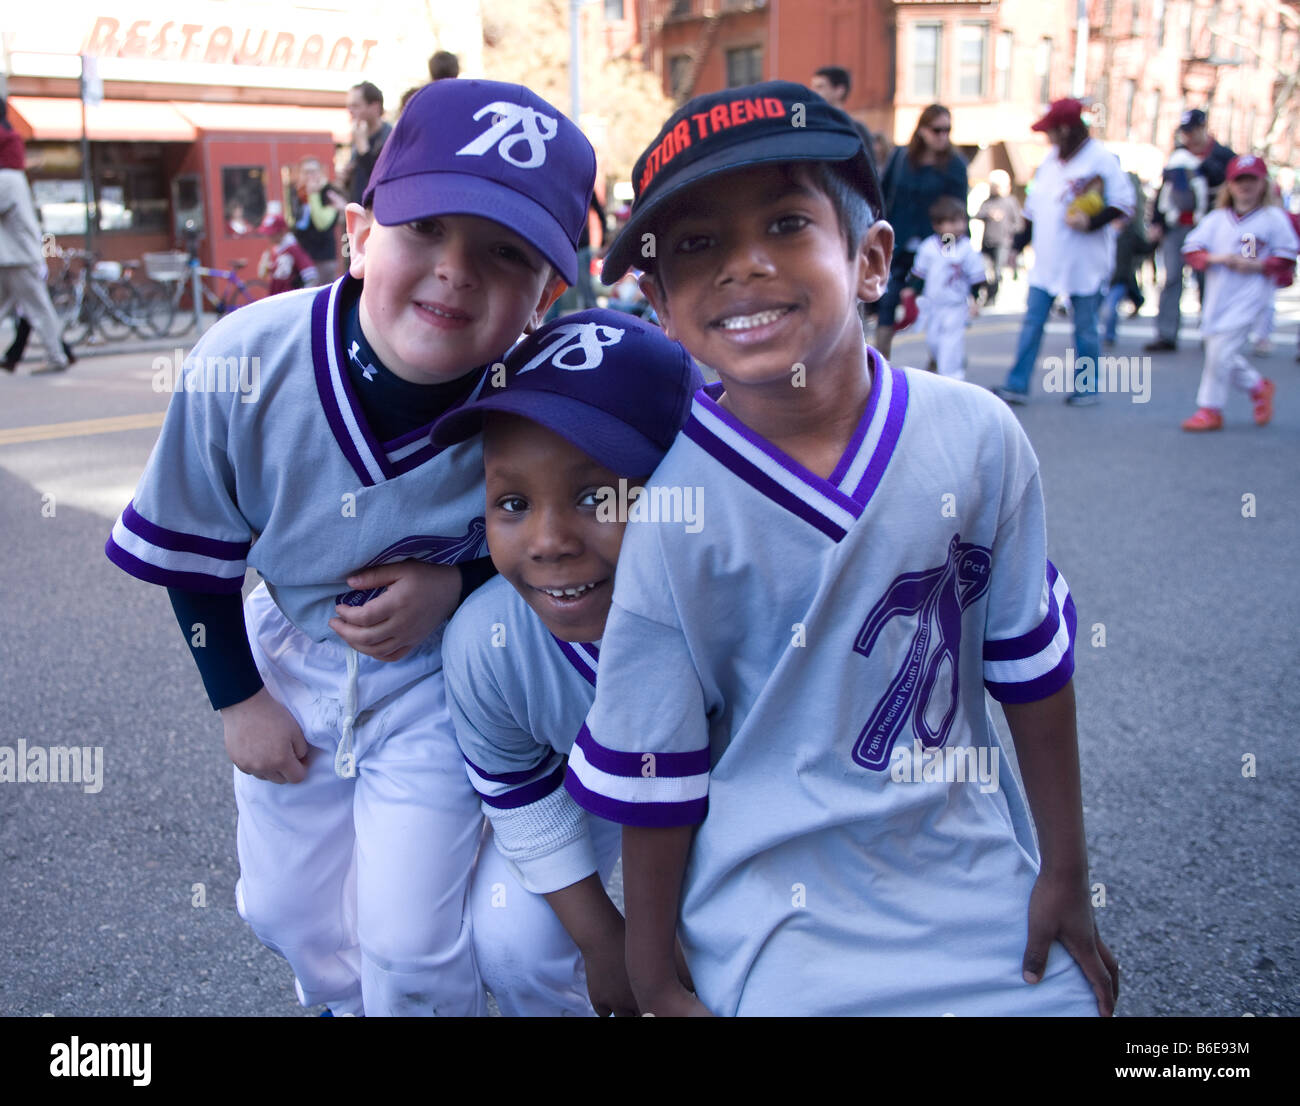 Young baseball superstars are on hand for a parade in Park Slope Brooklyn to kickoff the 2008 Little League baseball season Stock Photo